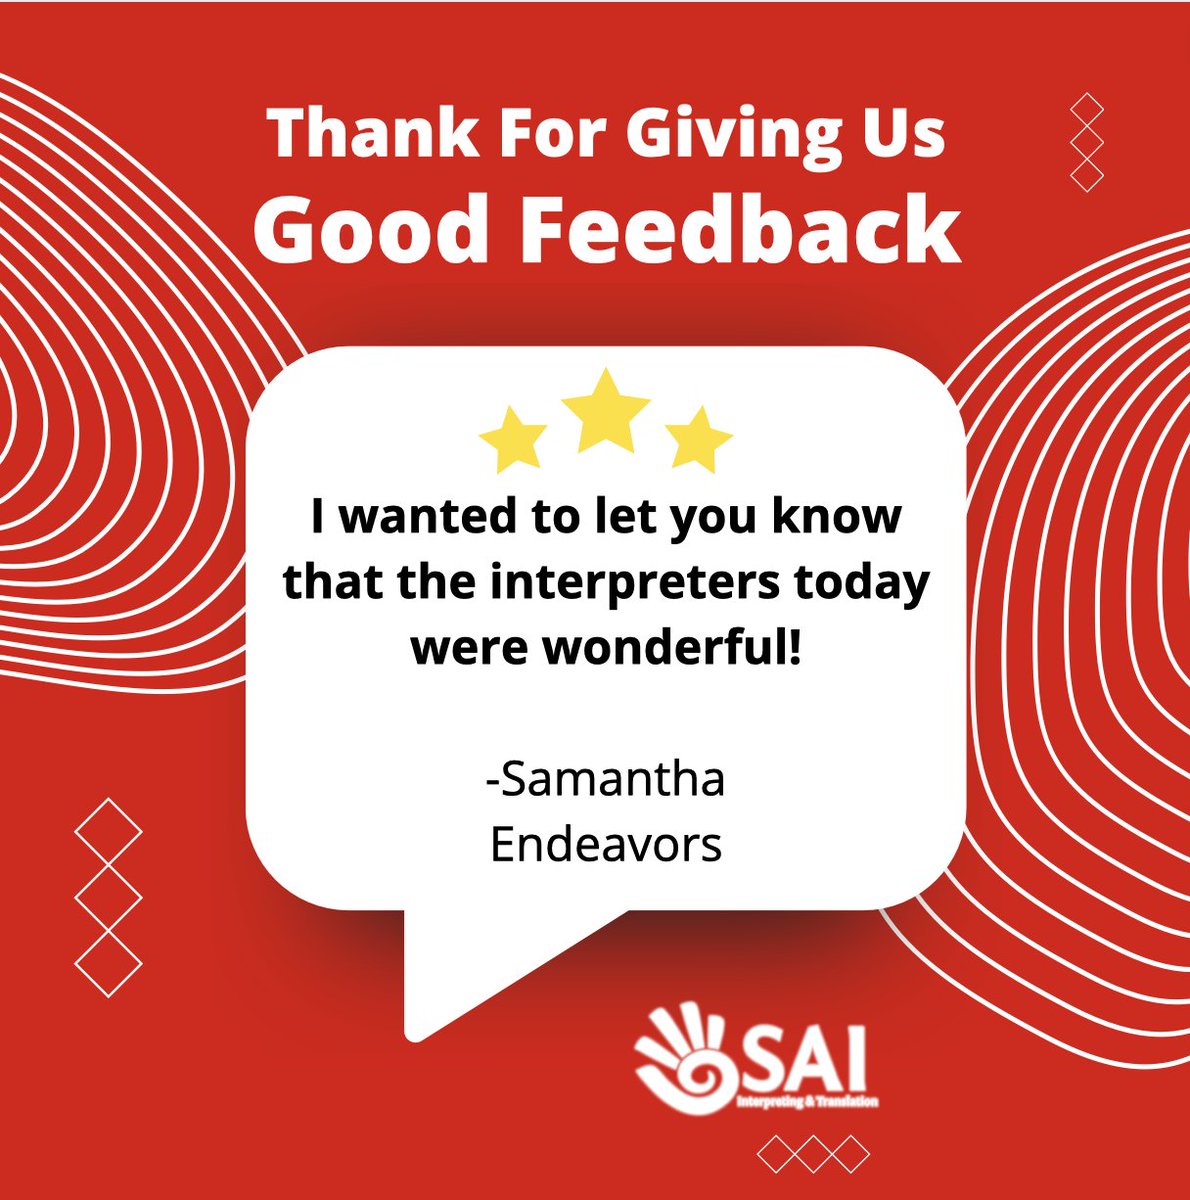 #SAIExperience
What a great way to end the week! We love hearing feedback from our #happy customers!
Shout out to our #awesome interpreters! Way to go Jeremy and Brittney!  

#ASL #Interpreters #customerservice #conferenceinterpreters #remote #onsite #languageacess